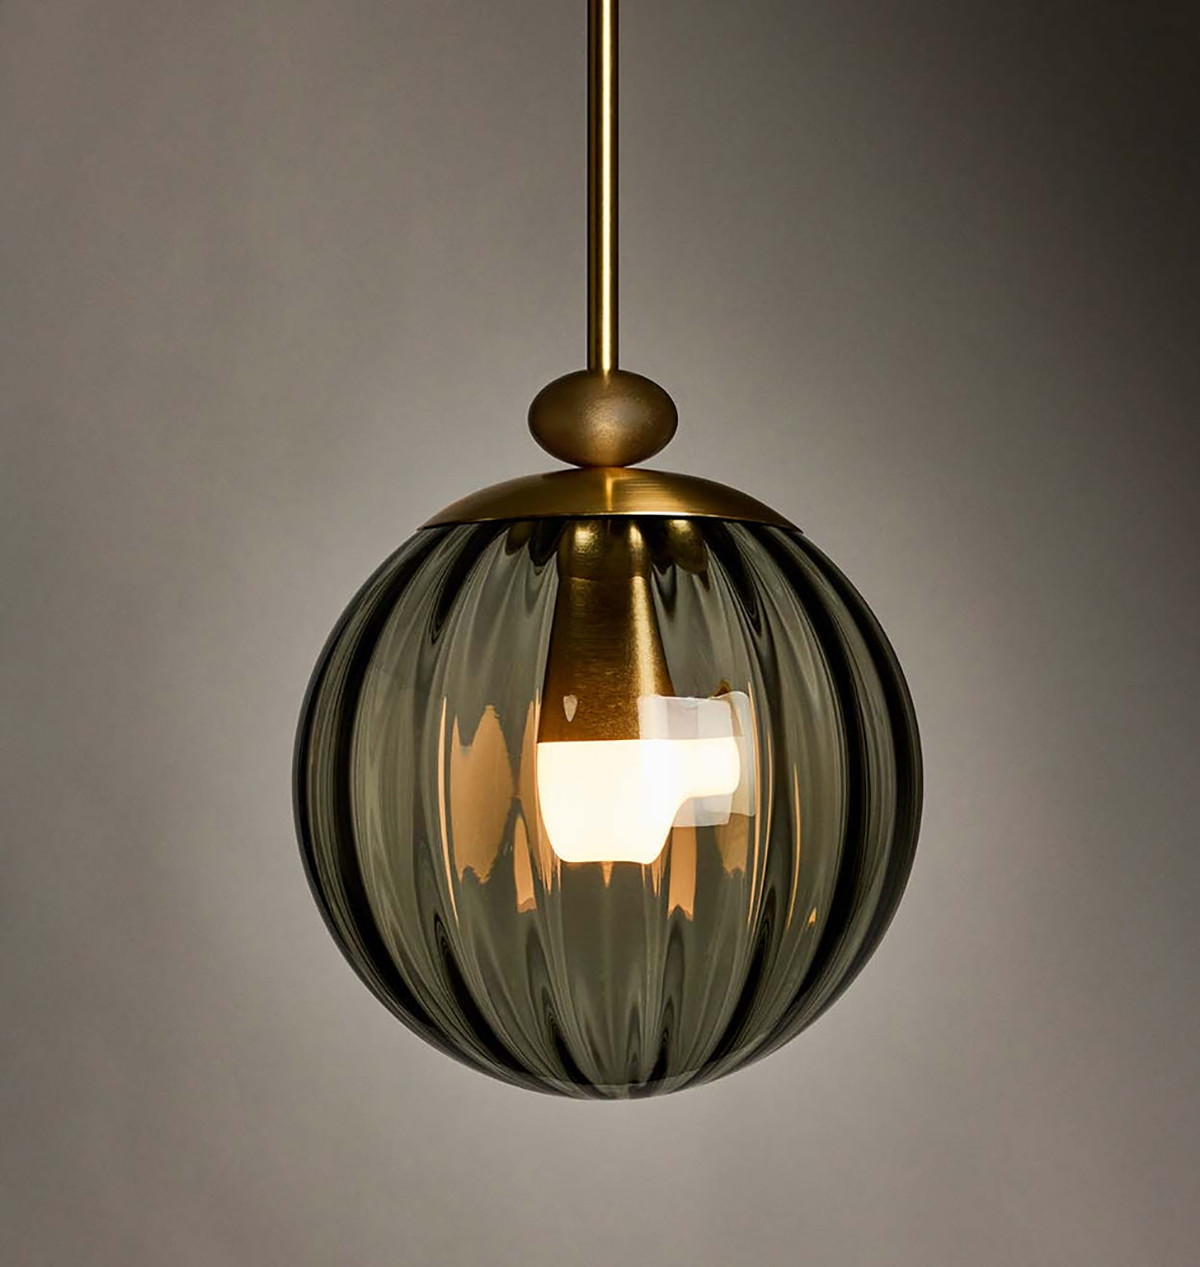 THE ROLL AND HILL PENDANT 03 GLOBE par Roll & Hill